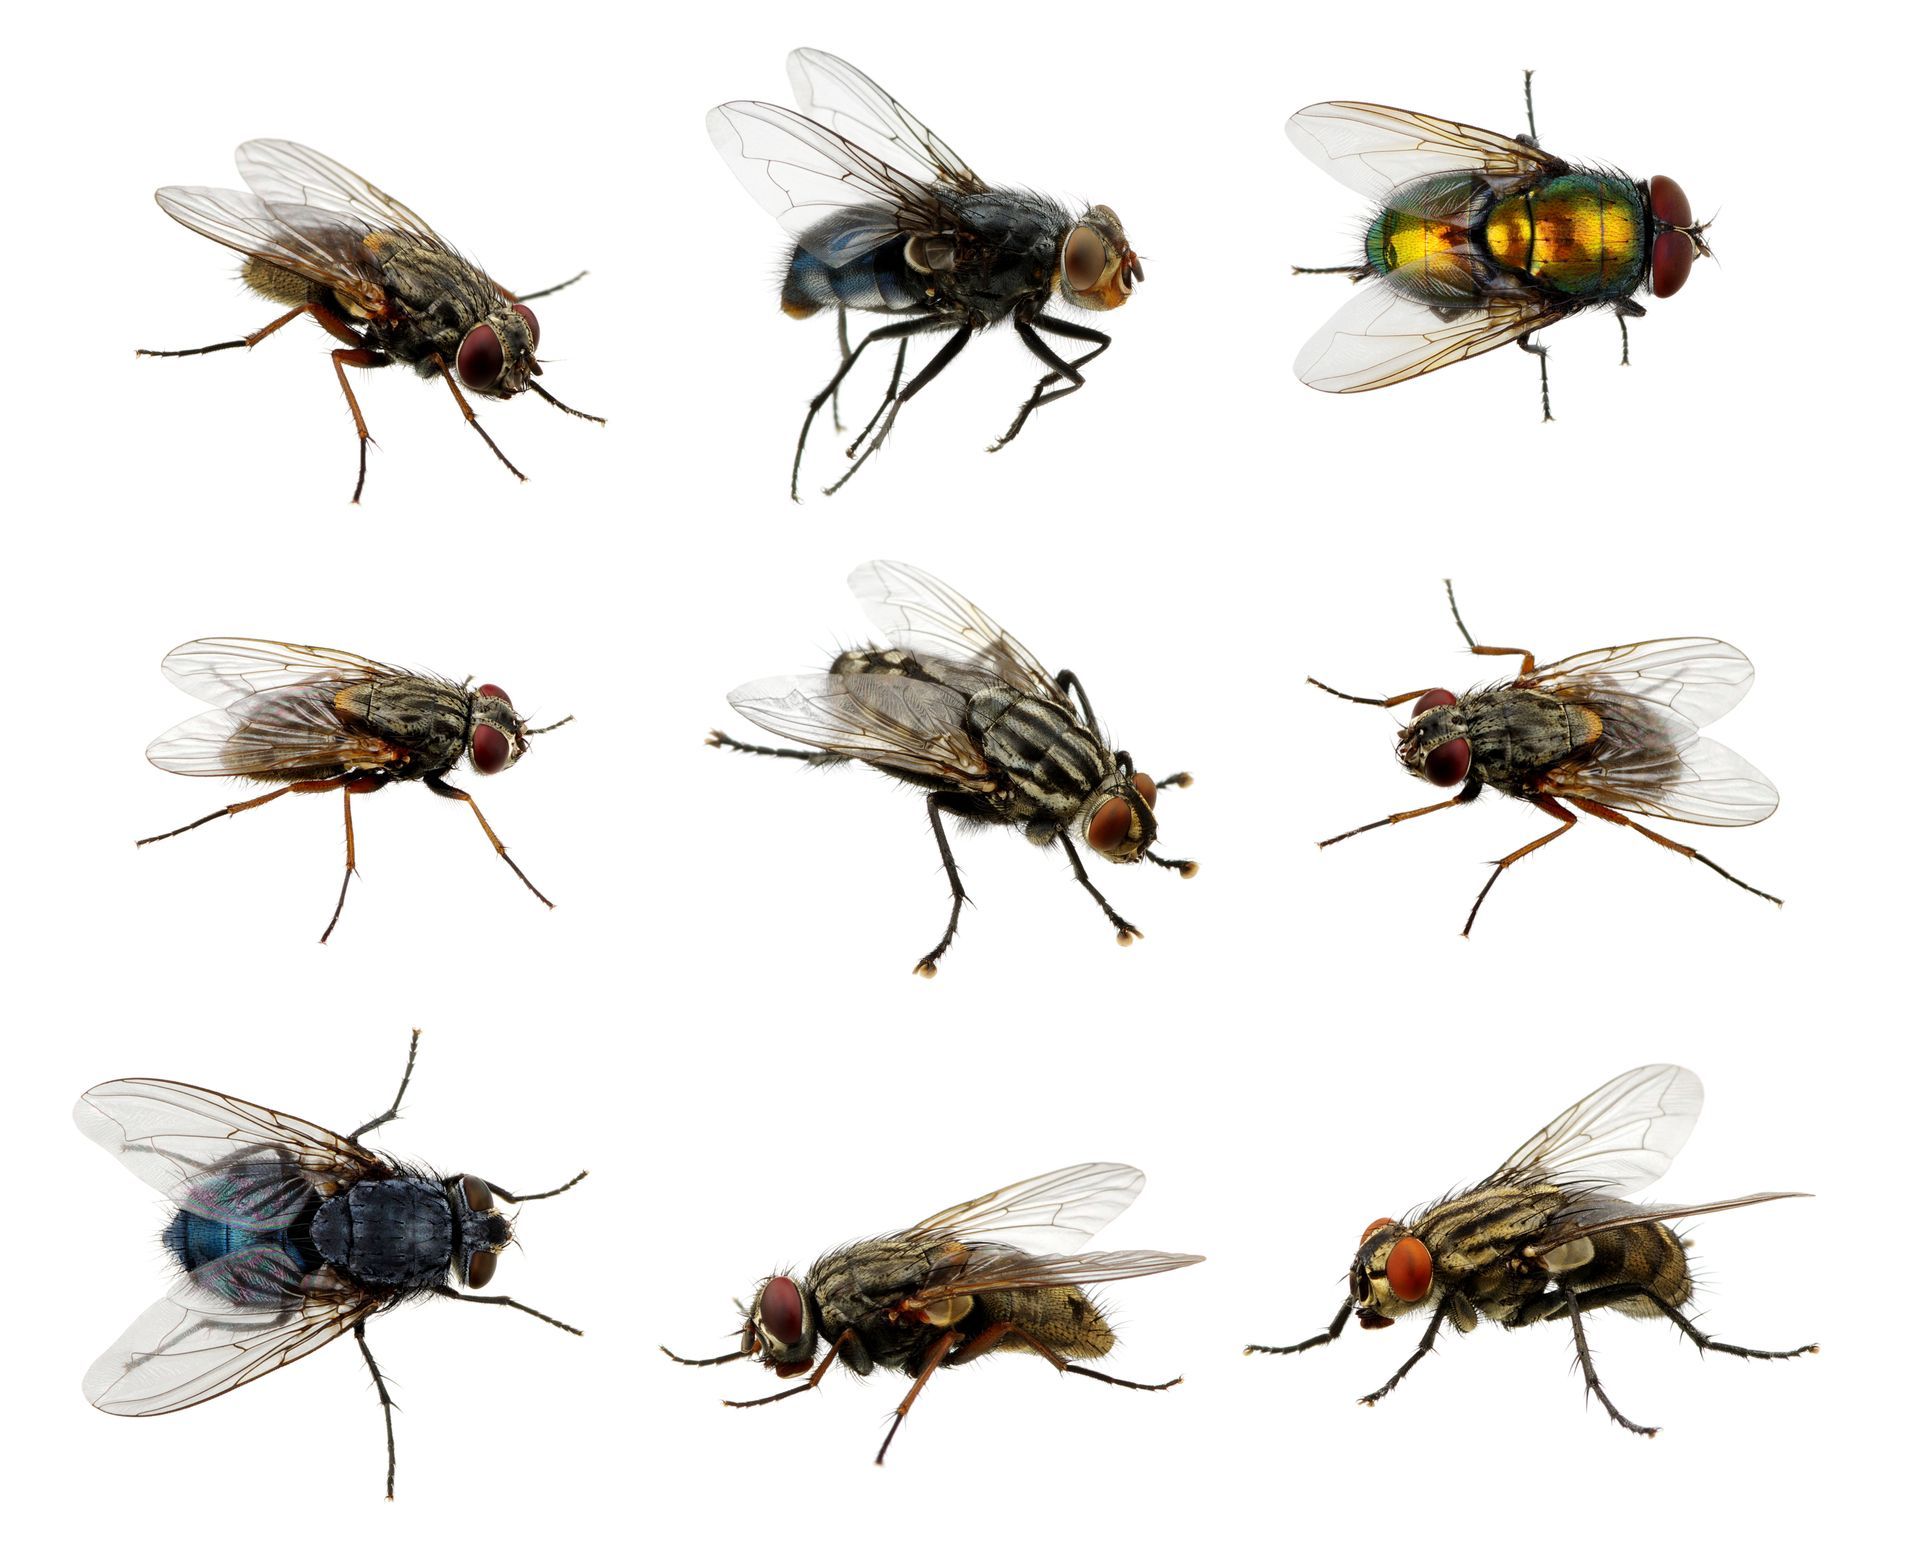 Common Filth Flies: How to Get Rid of Filth Flies